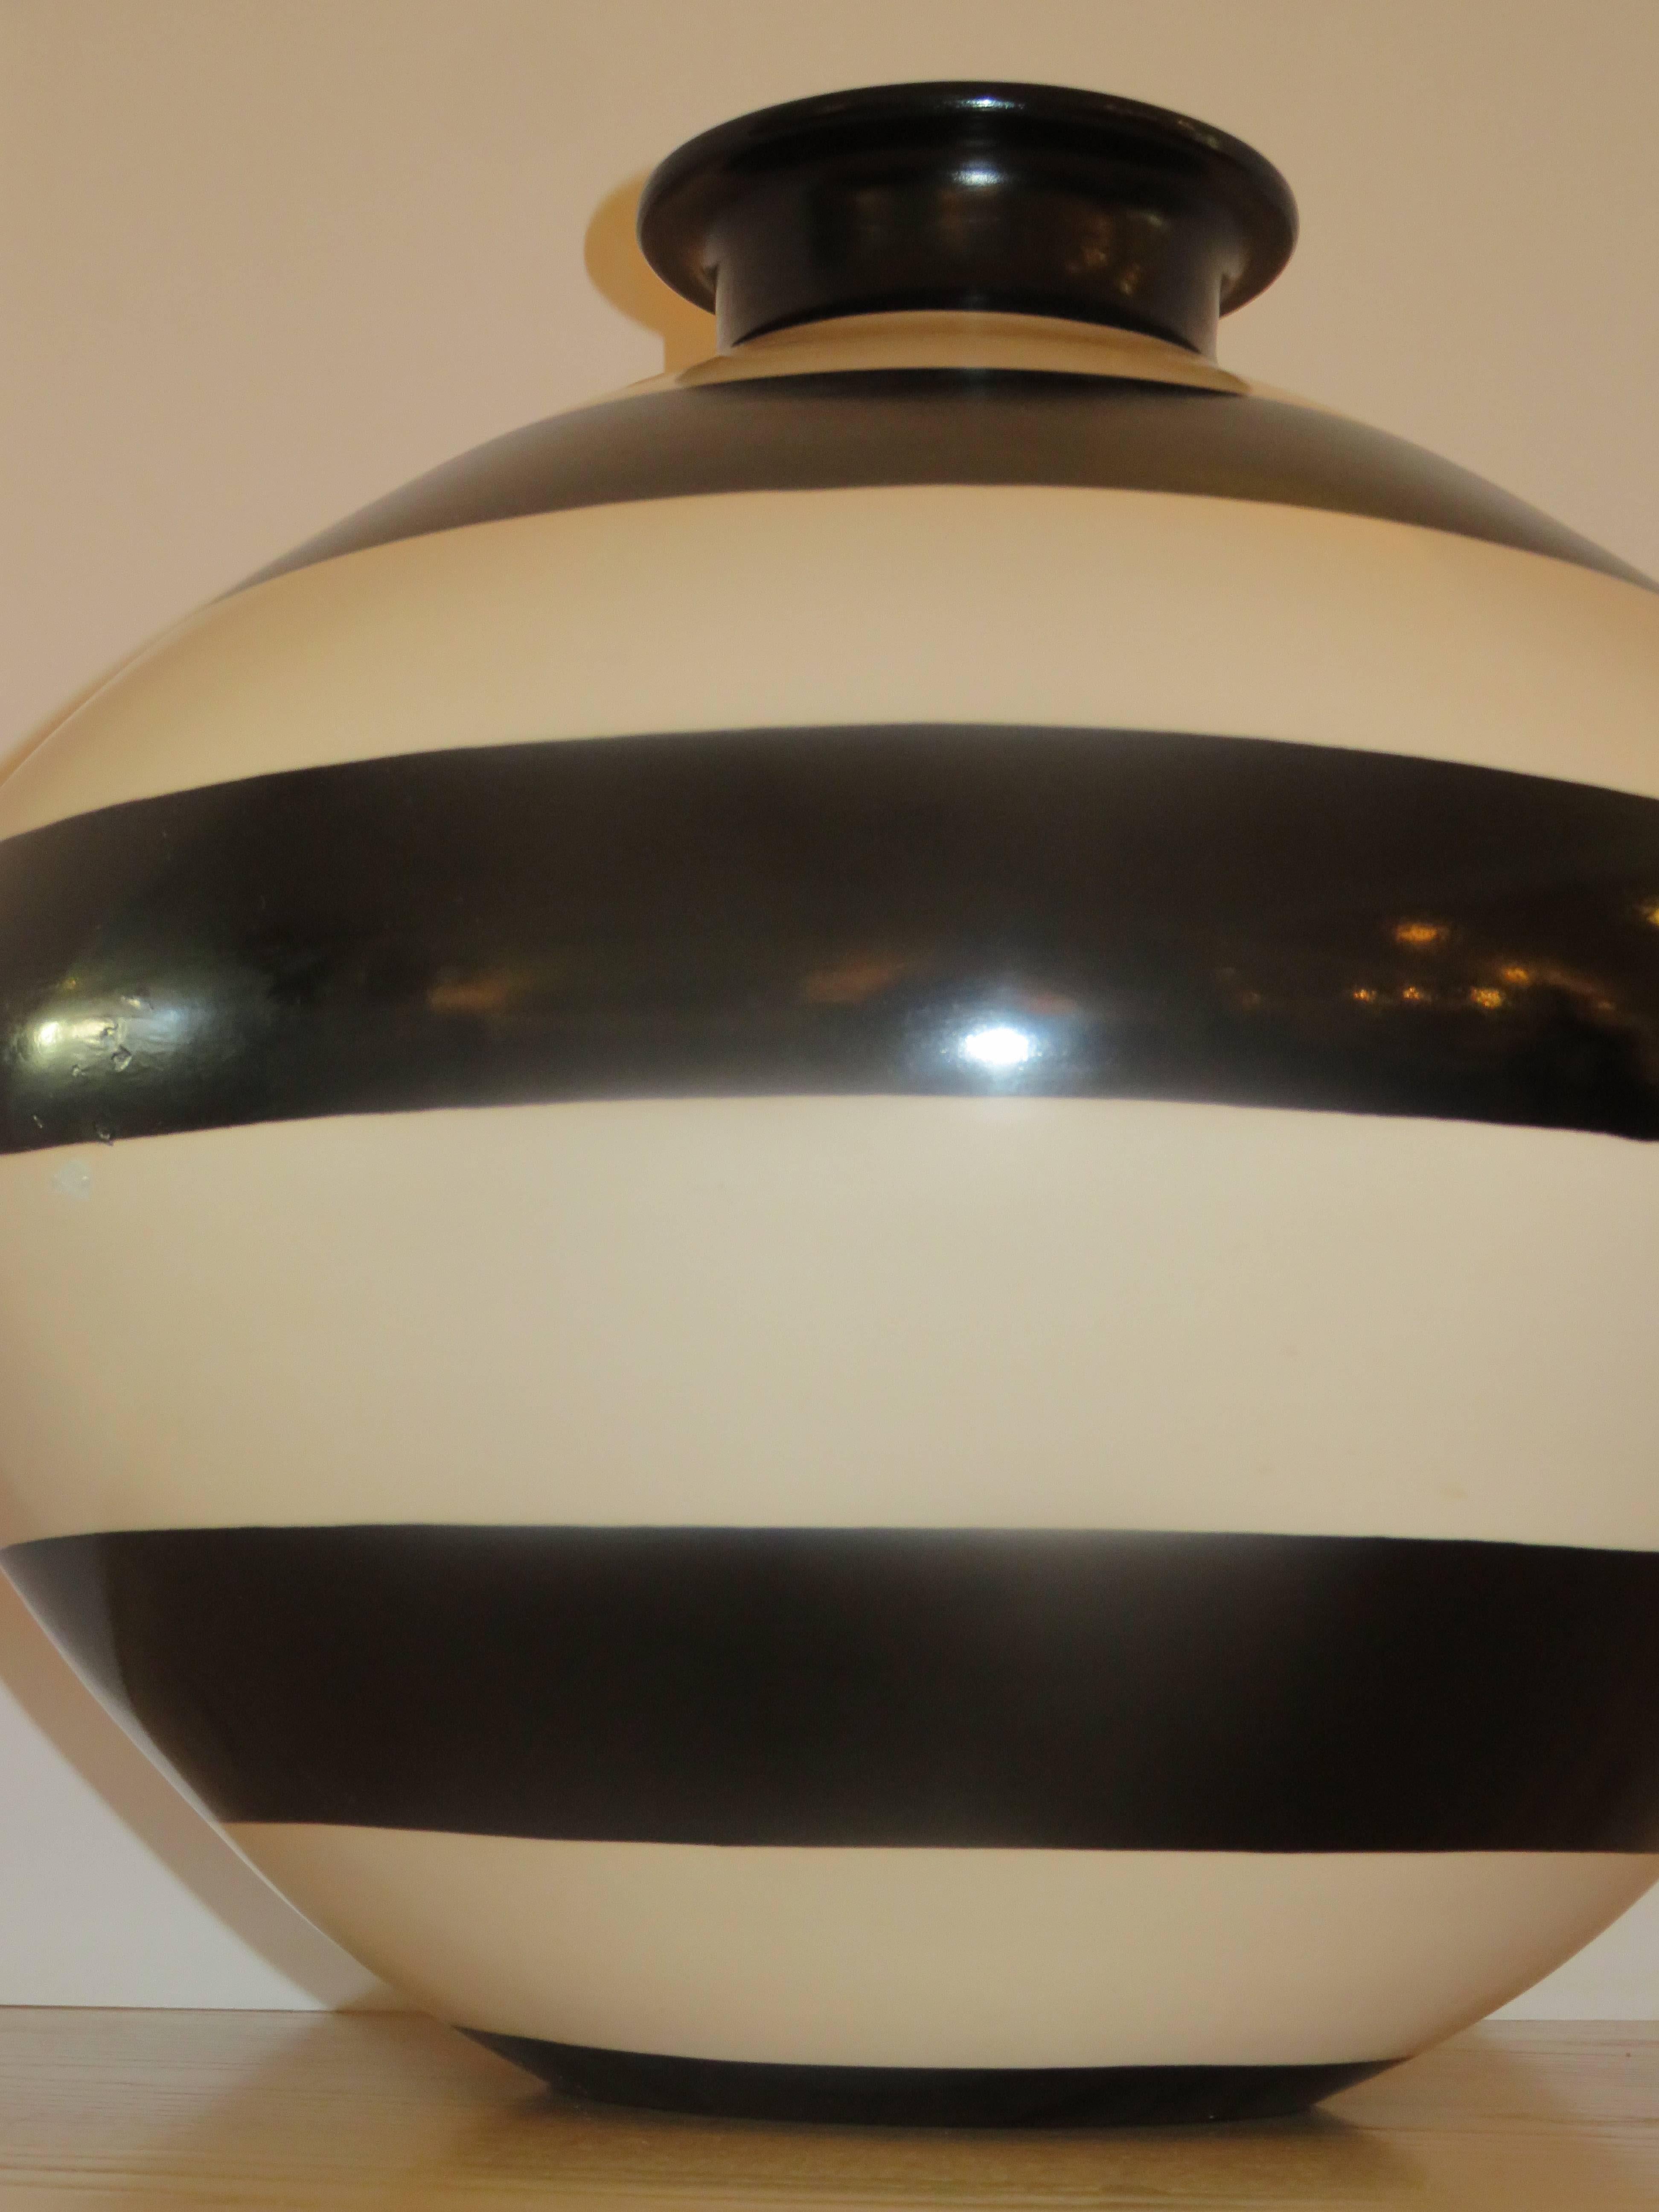 A bold and striking large hand thrown ceramic black and white striped vessel from Studio Calle. Two sizes available this being the largest at 18 inches high and 24 inches wide. The other shown in image 3 is 12 inches high and 20 inches wide.